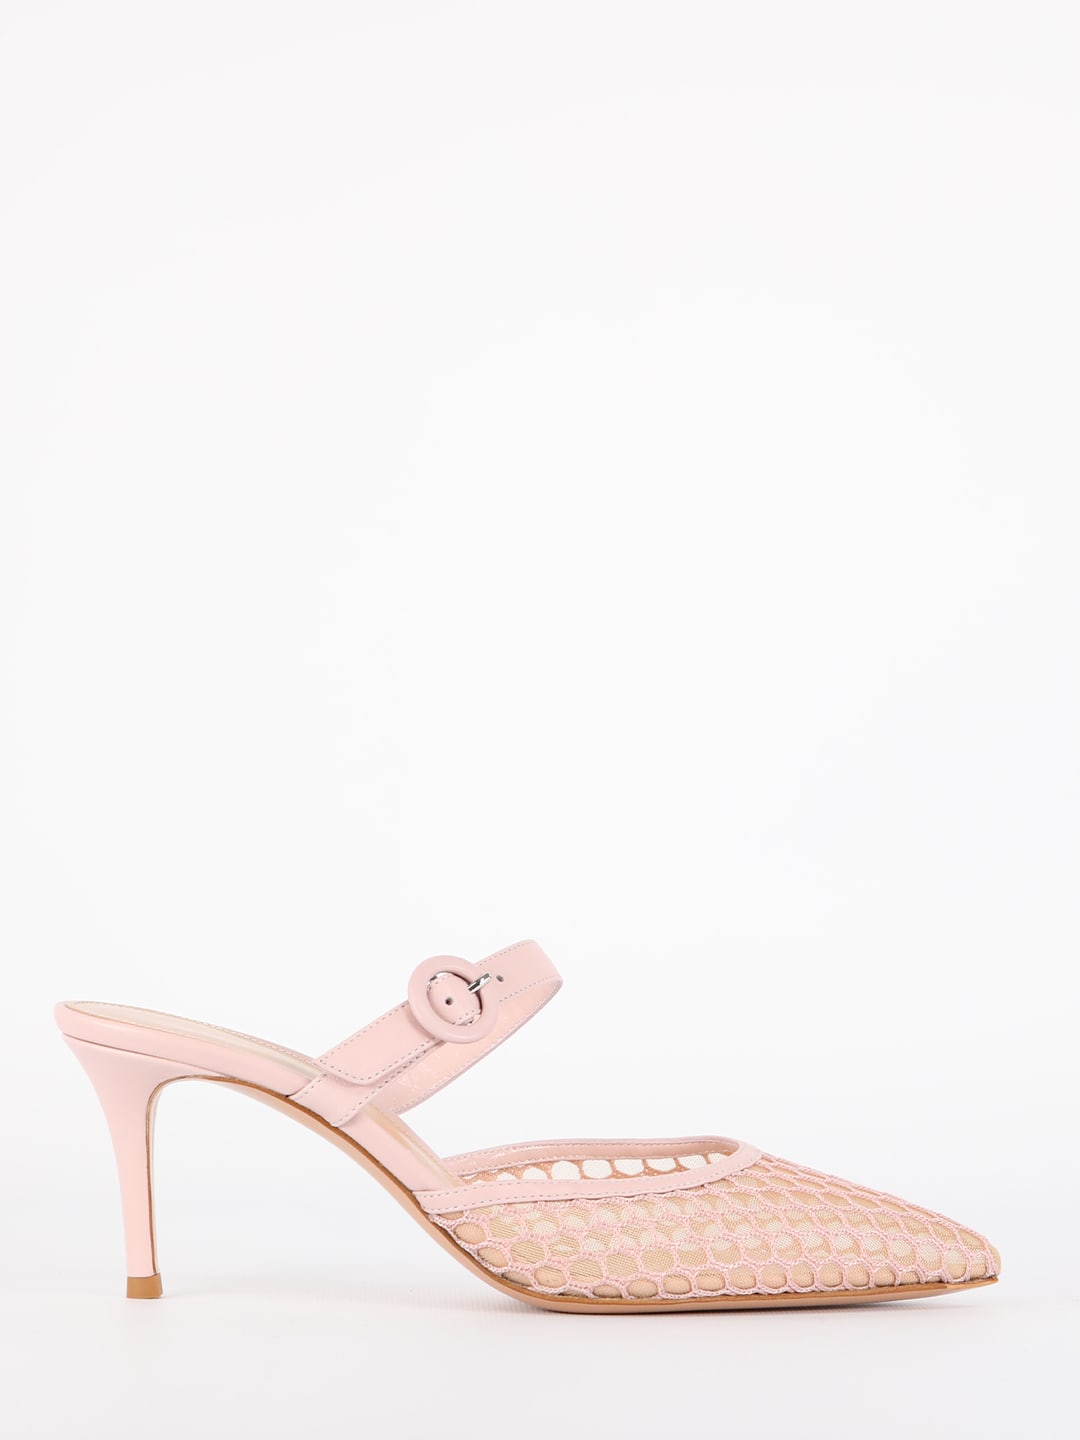 gianvito rossi pink mules with strap